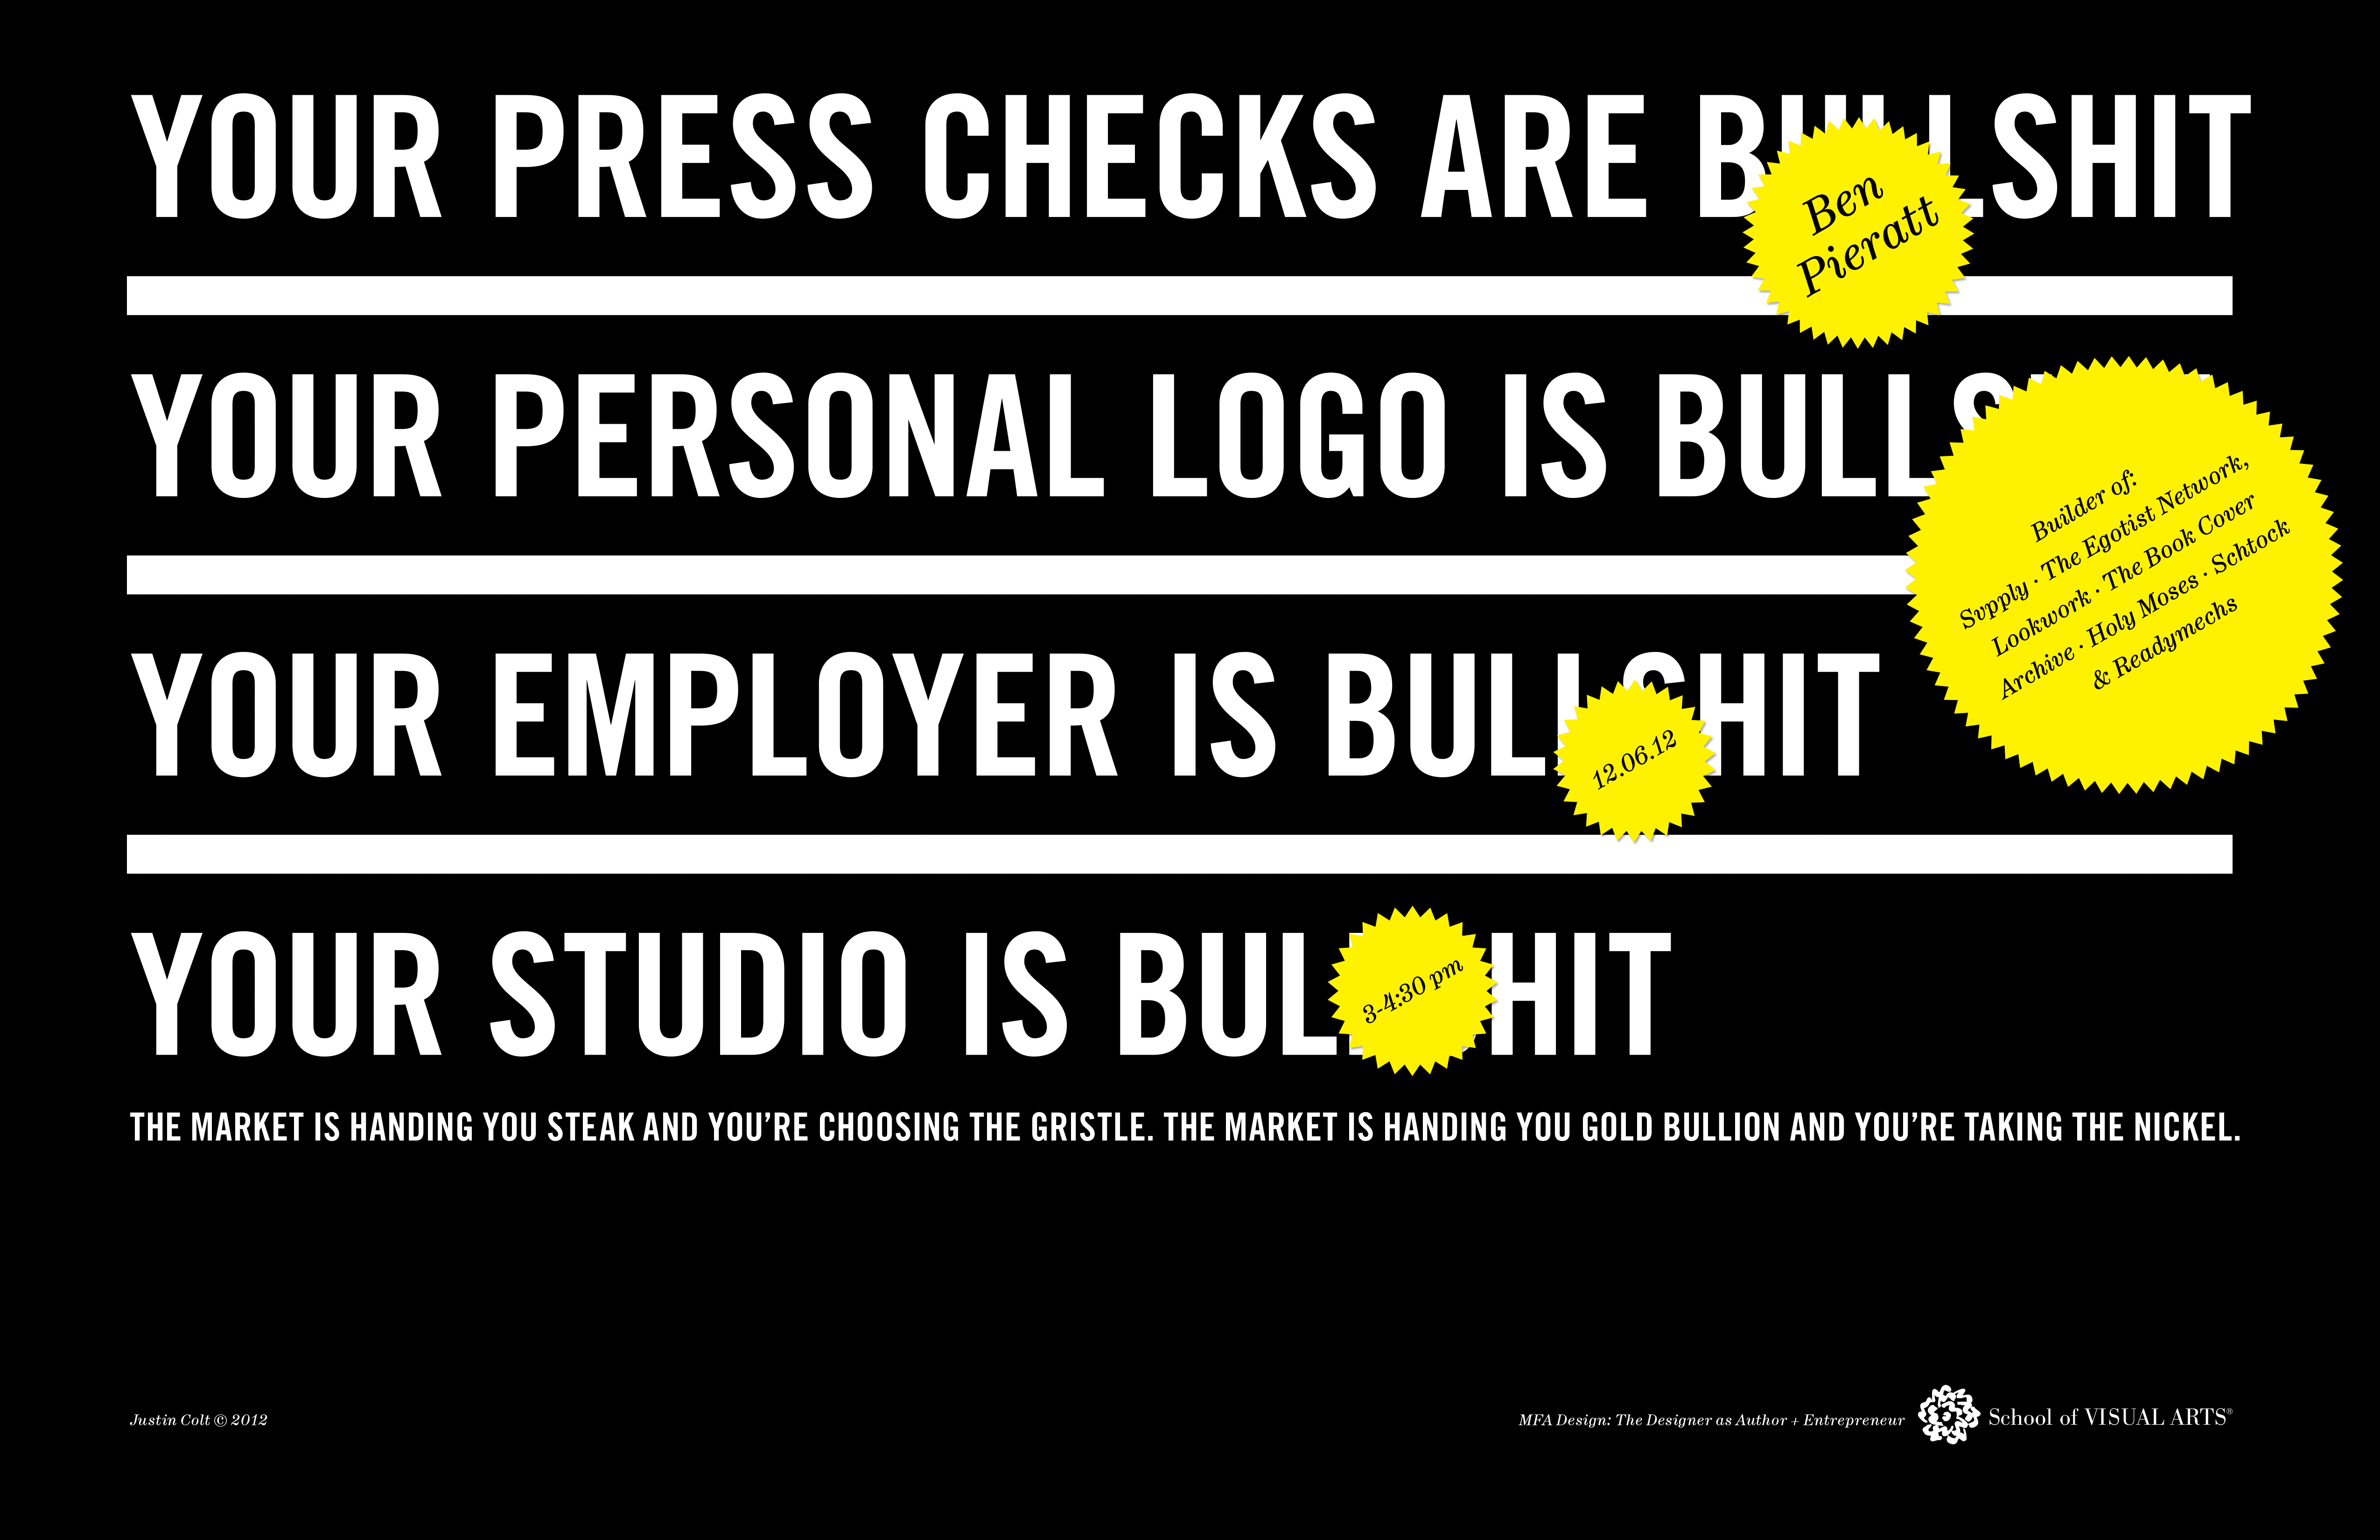 A poster with some text that says: Your press checks are bullshit. Your personal logo is bullshit. Your Employer is bullshit. Your studio is bullshit. Also some yellow star like stickers are over the text.